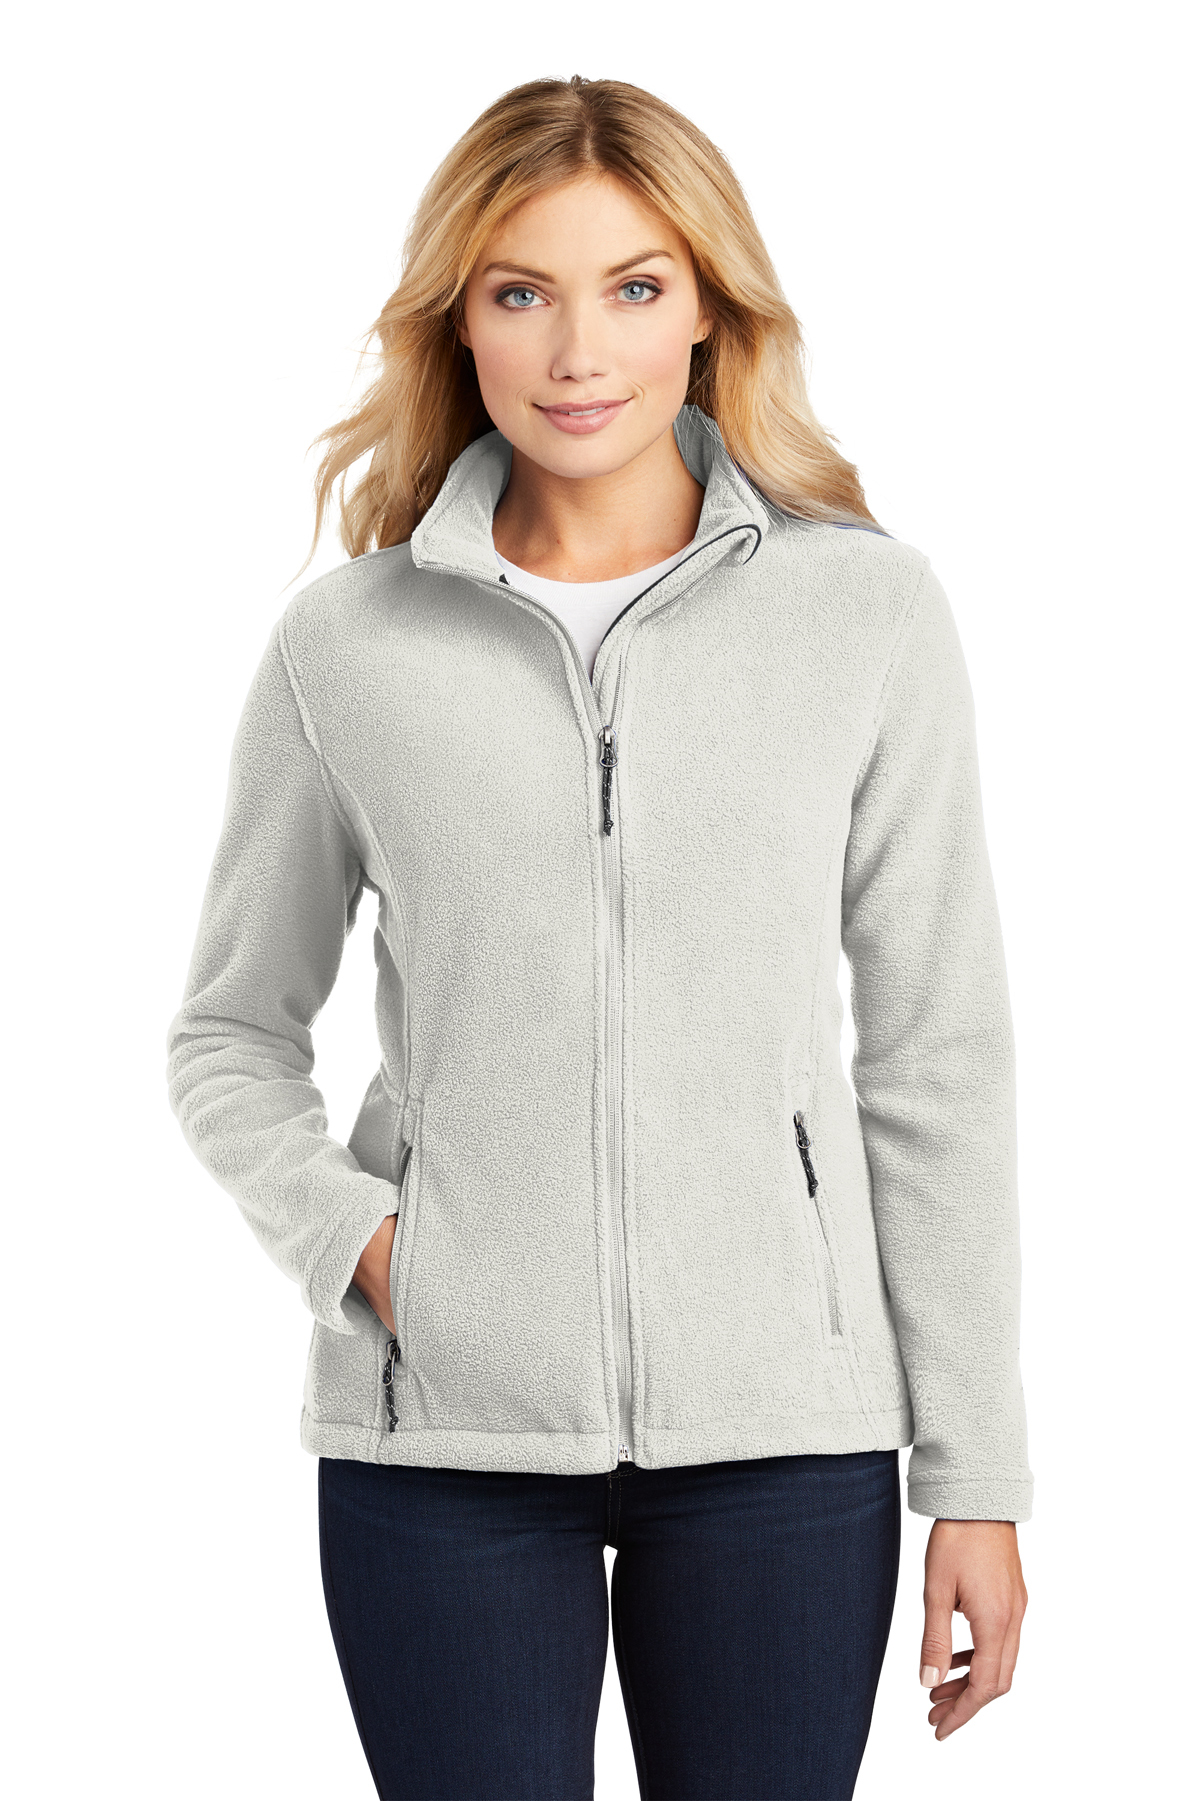 Cairn Recovery Resources - Port Authority® Ladies Value Fleece